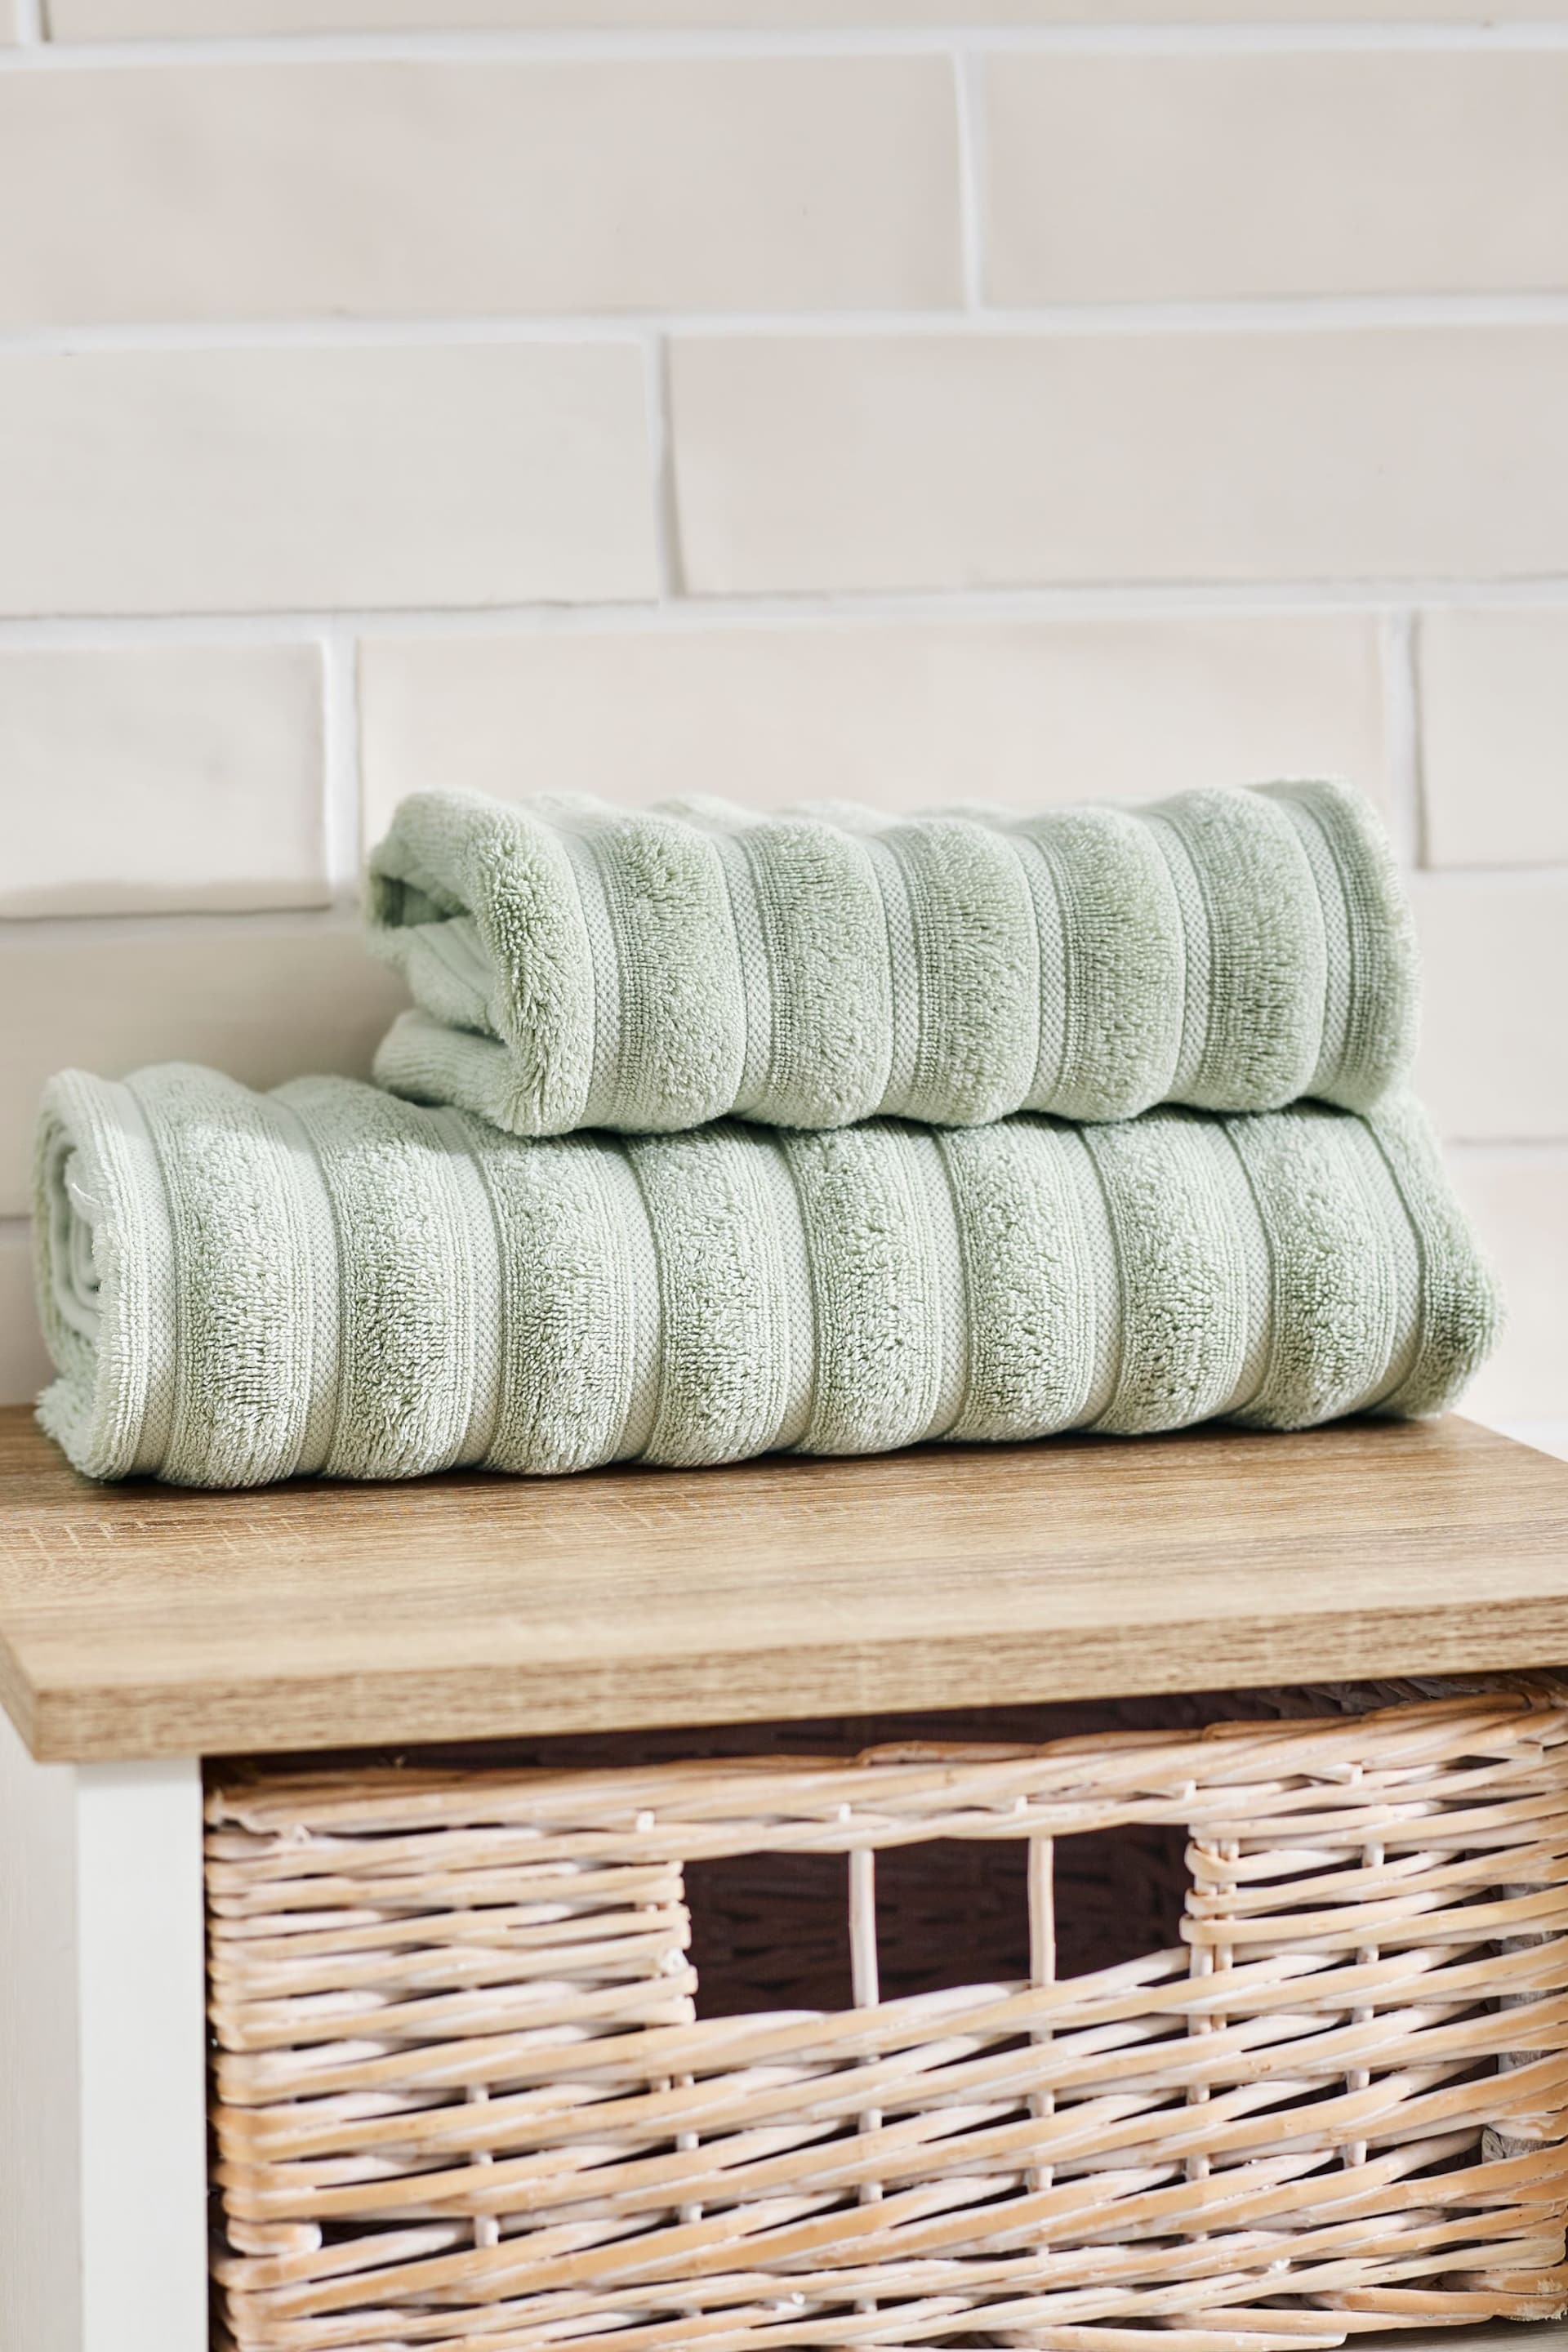 Sage Green Ribbed Towel 100% Cotton - Image 6 of 6